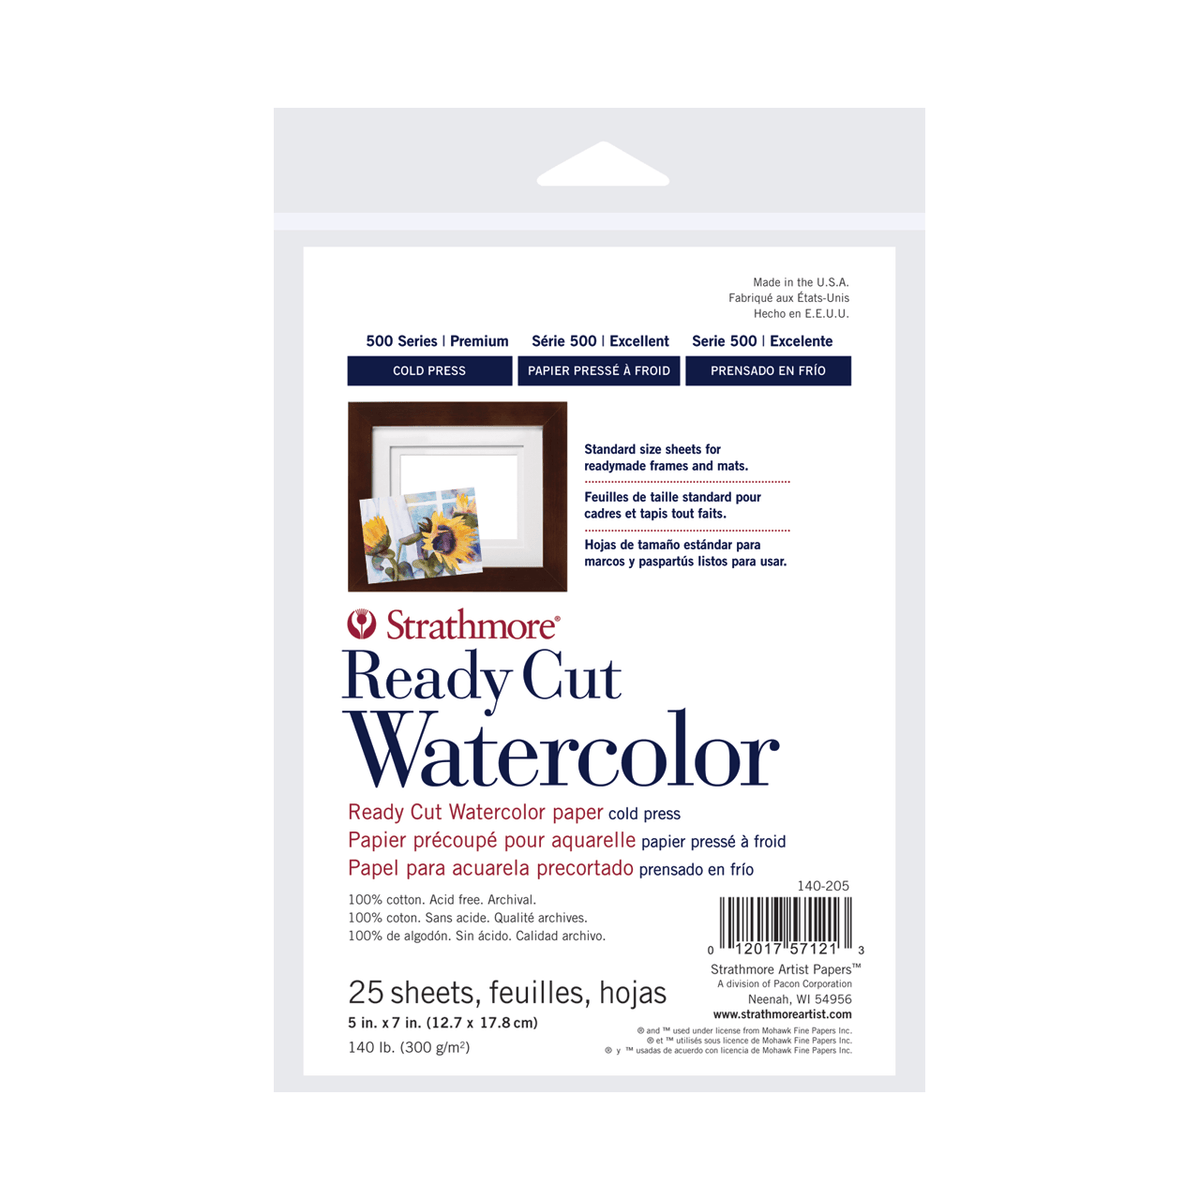 Strathmore 500 Series Cold Press Watercolor Paper